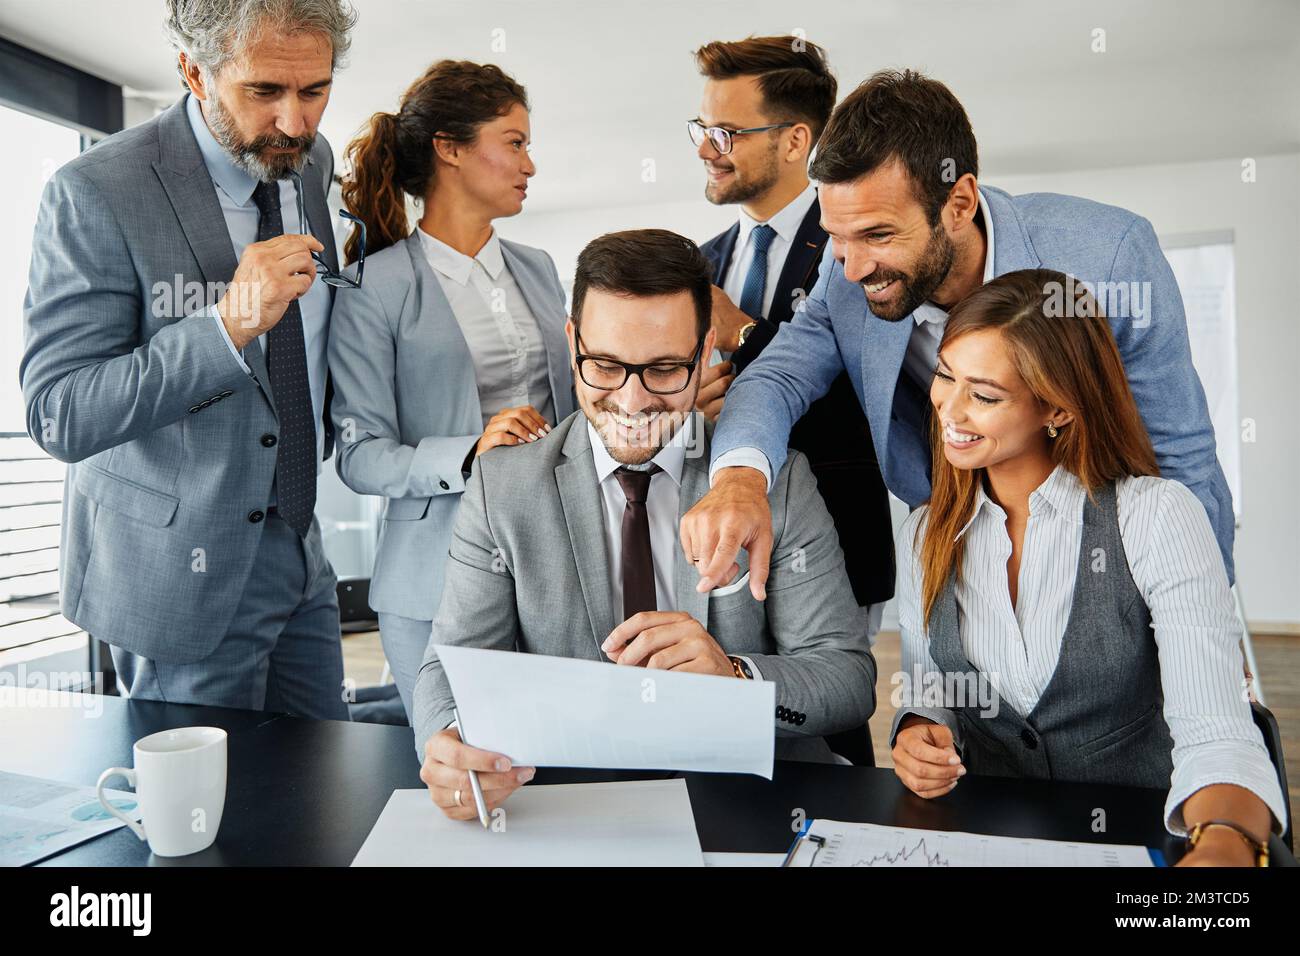 young business people meeting office teamwork group success corporate senior mature colleague tablet computer network Stock Photo